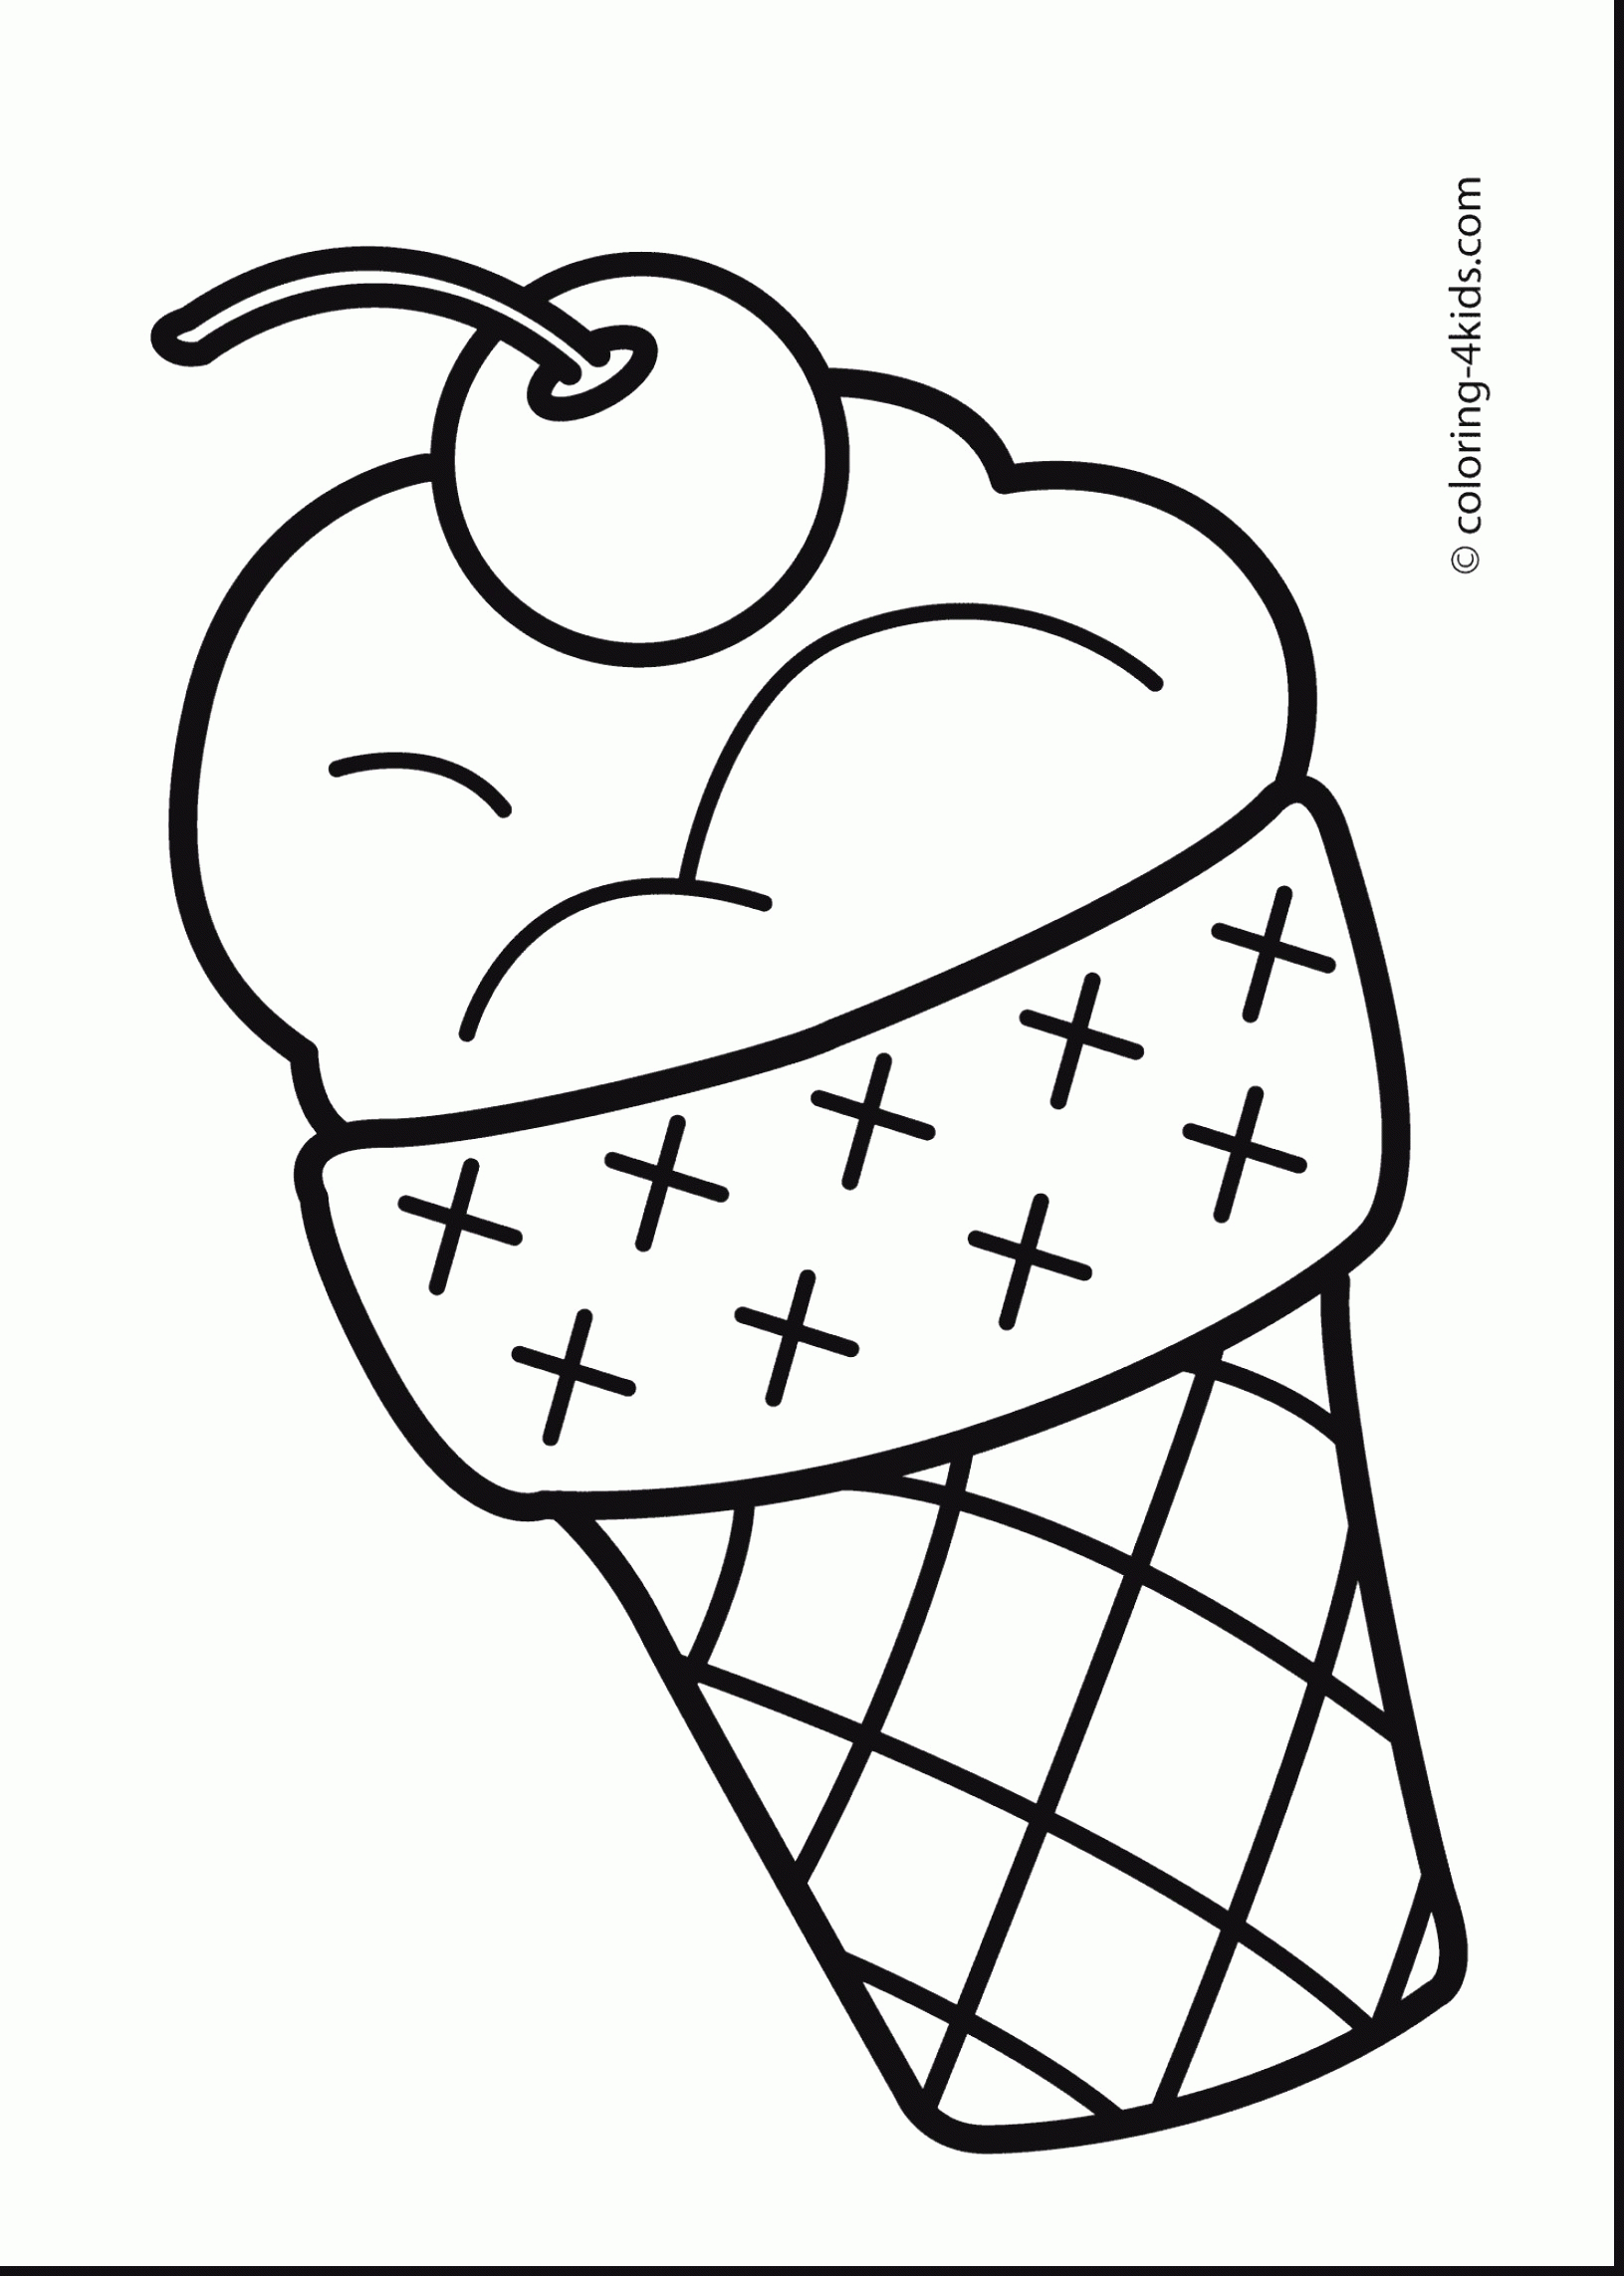 Coloring Ideas : Incredible Free Printableing Pages For Kindergarten - Free Printable Coloring Pages For Kids